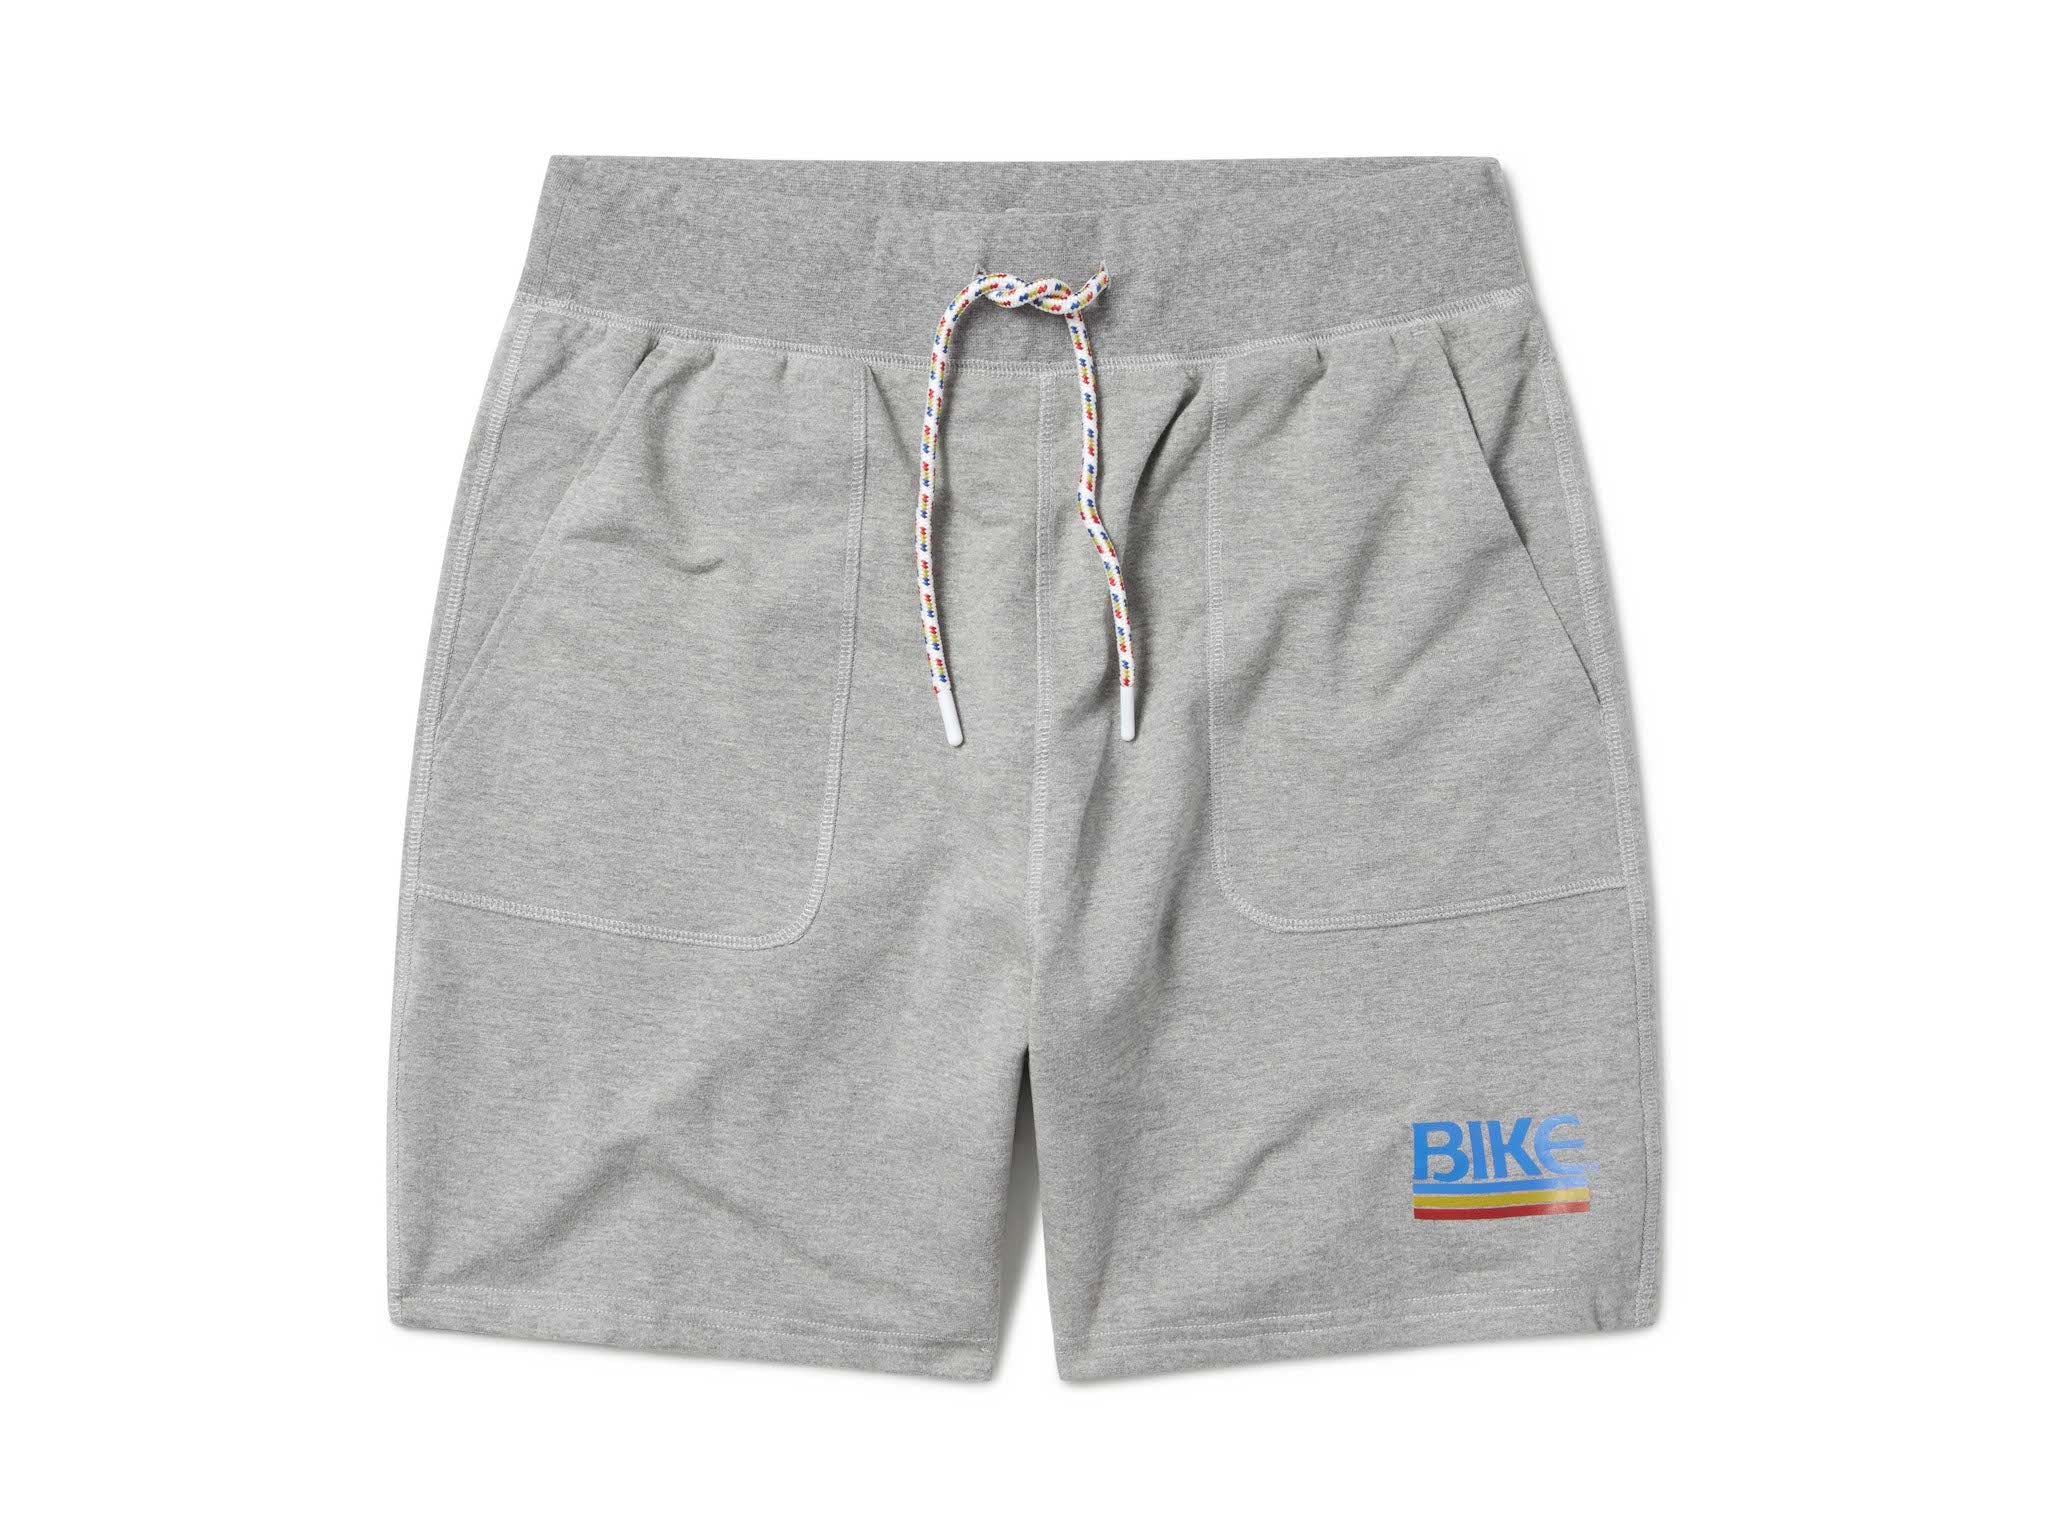 Men's French Terry Sweat Shorts - BIKE® Athletic